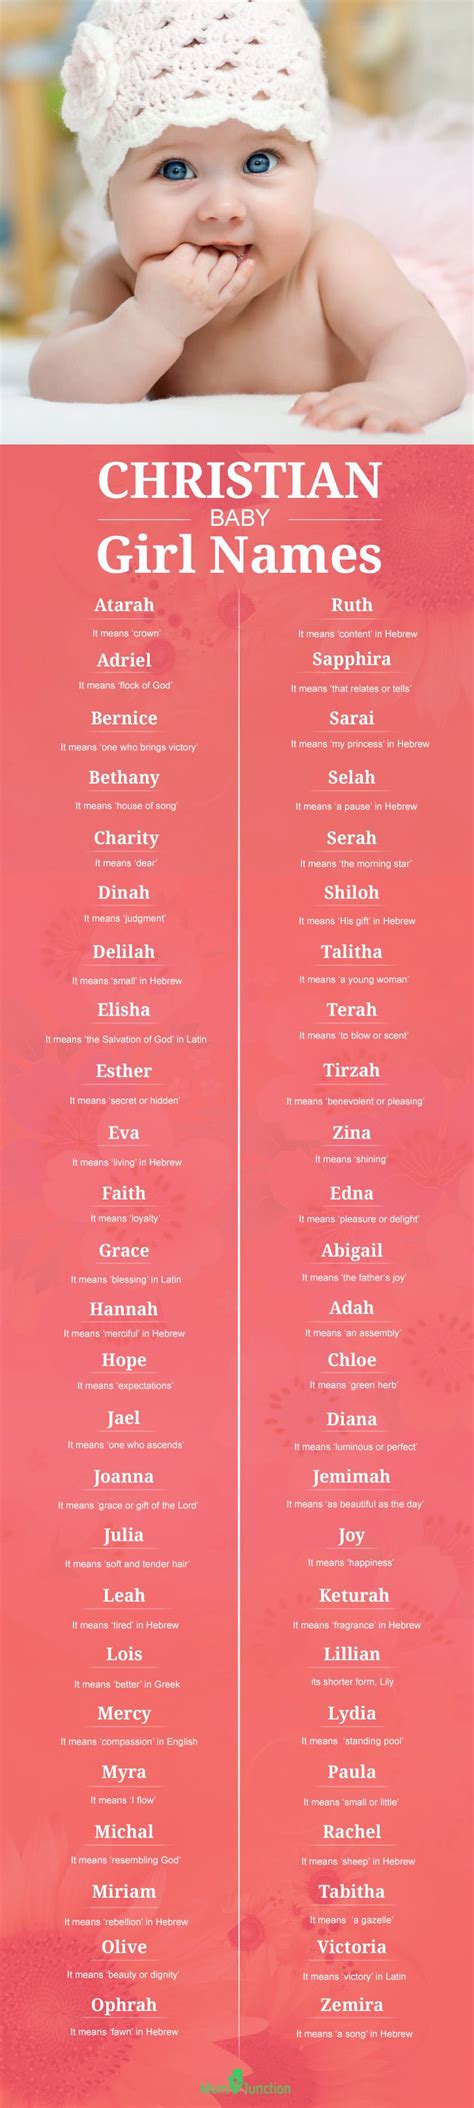 50 Beautiful Christian Baby Girl Names With Their Meanings